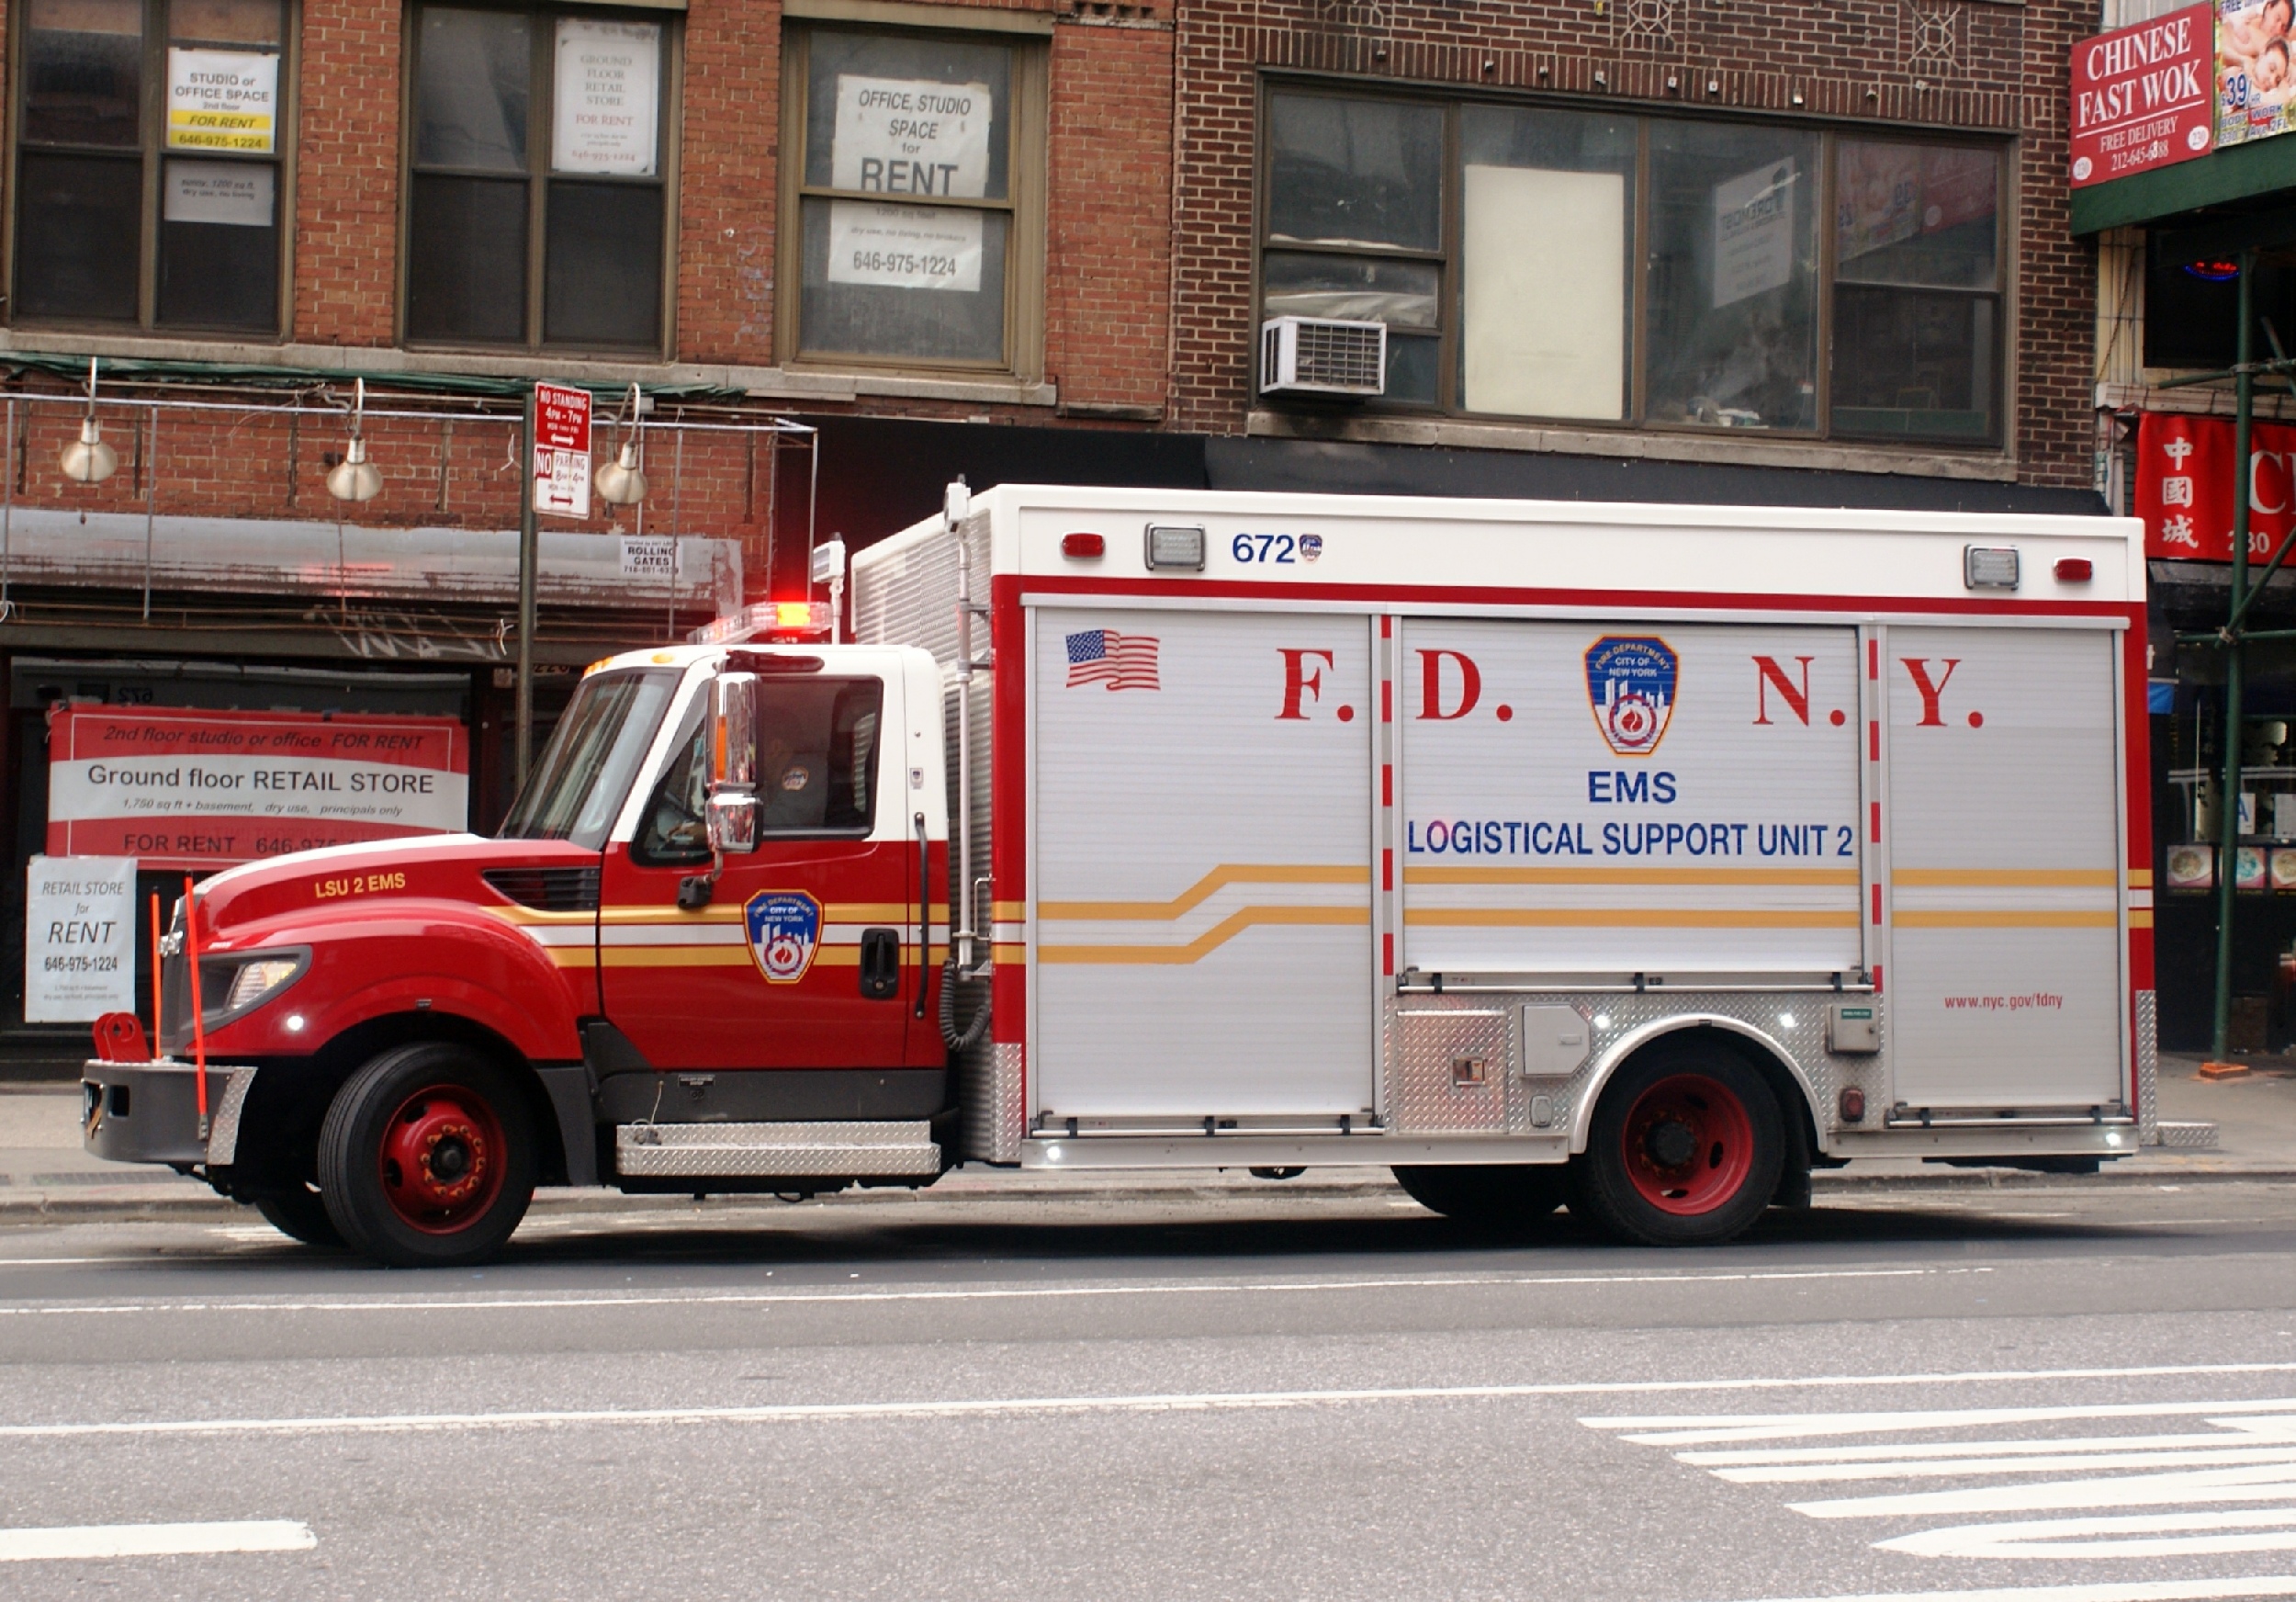 Support units. FDNY ems. Logistical support. Ems Division FDNY. FDNY расшифровка.